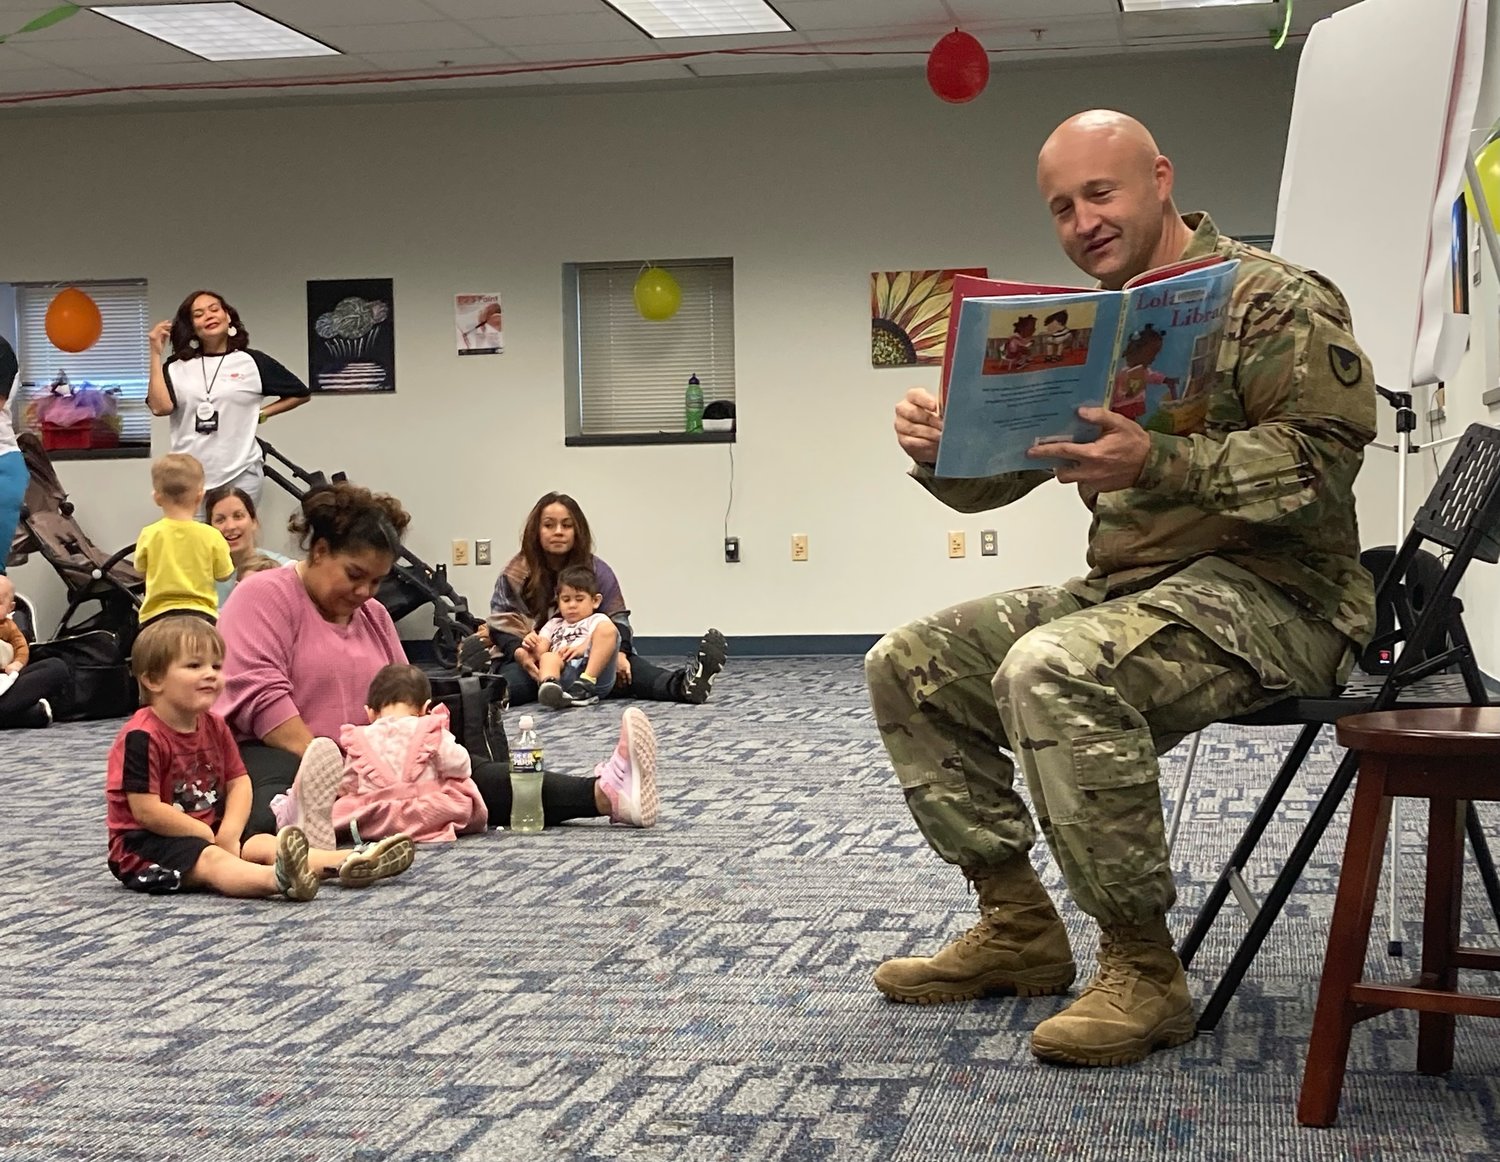 Col. John Wilcox, the Fort Bragg garrison commander, reads 'Lola at the Library' by Anna McQuinn during the 25th anniversary celebration of Throckmorton Library on Fort Bragg on Wednesday.